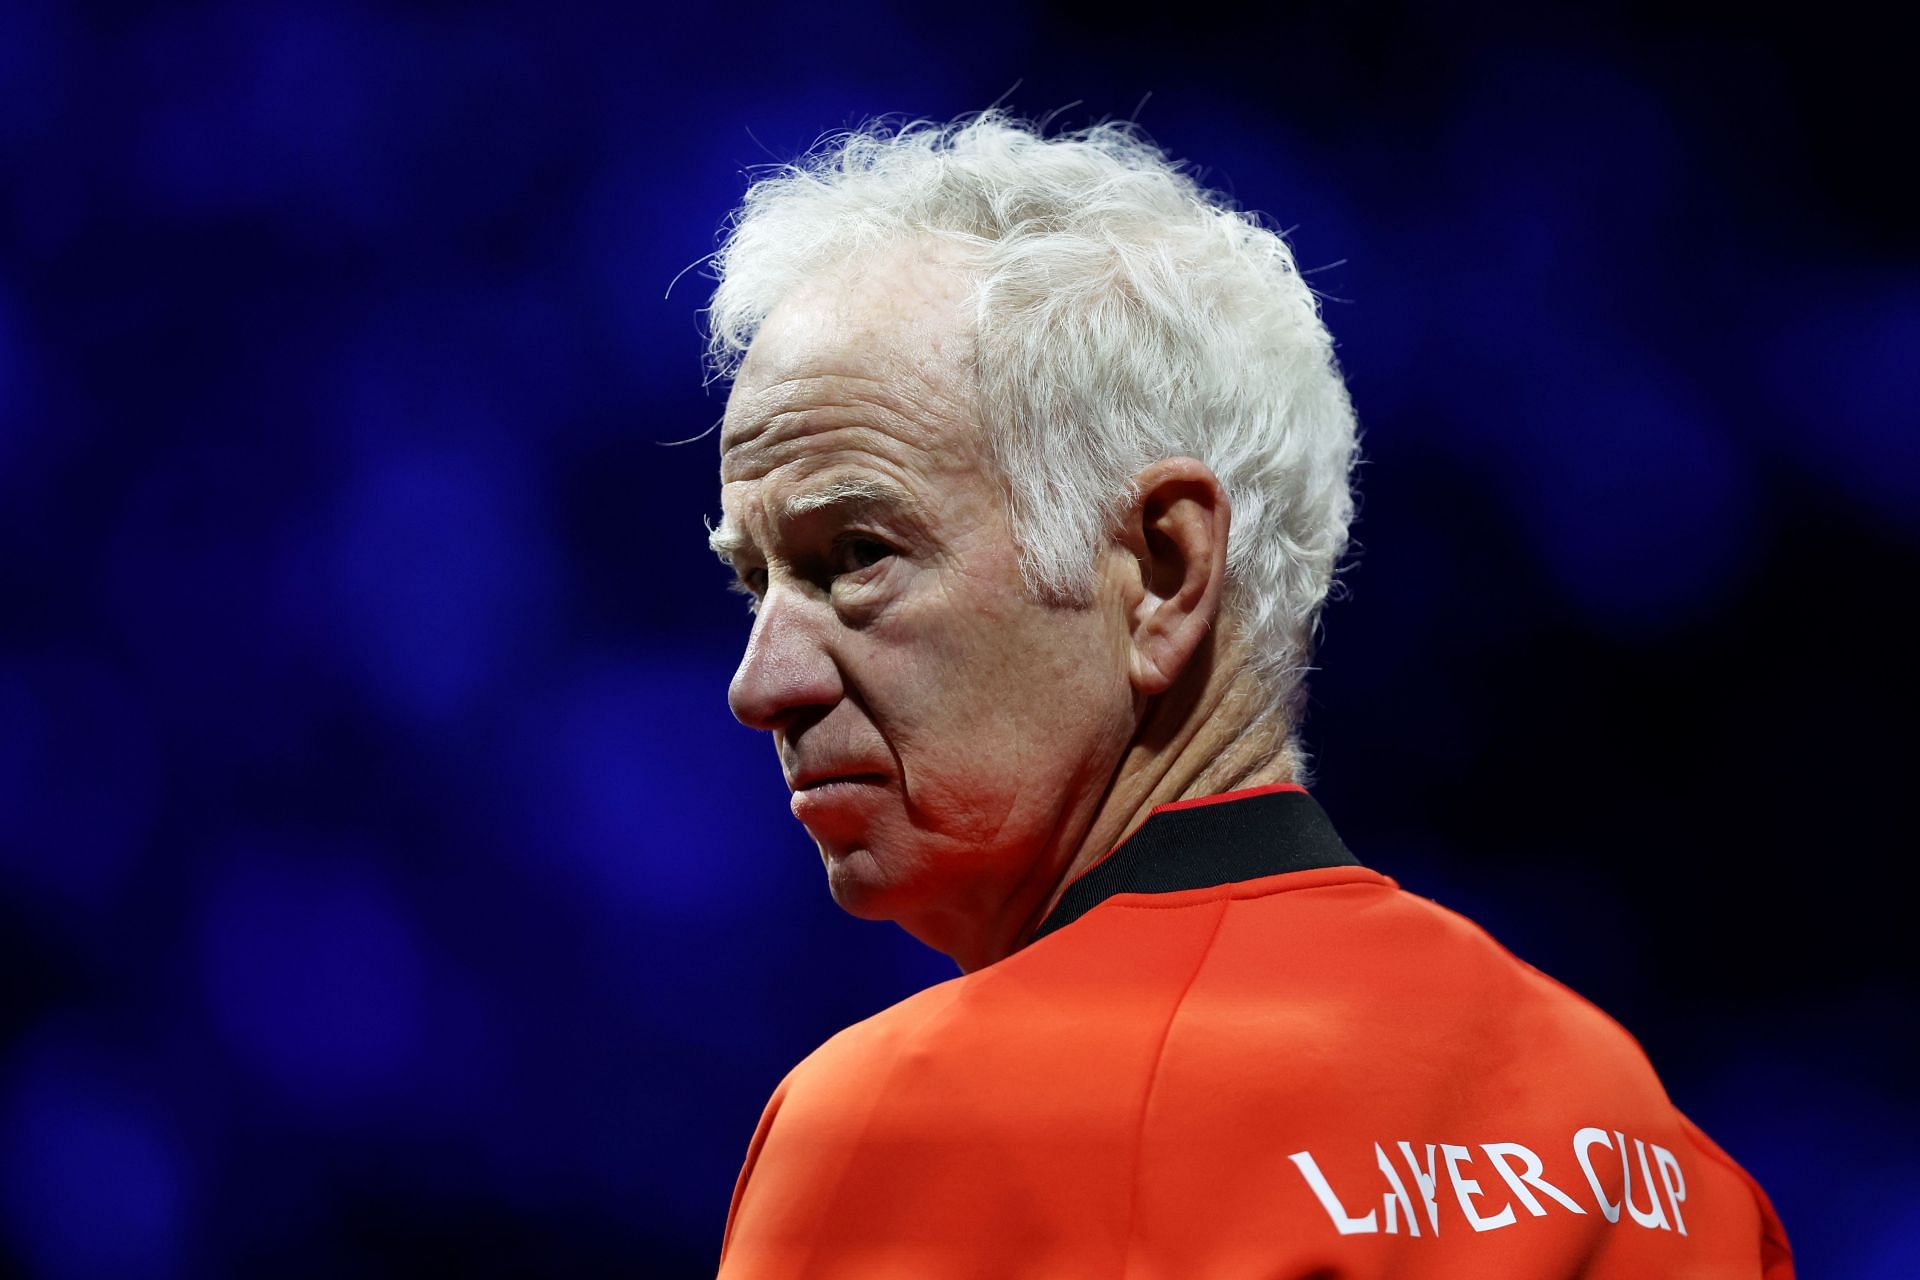 Laver Cup 2022 - Day Three